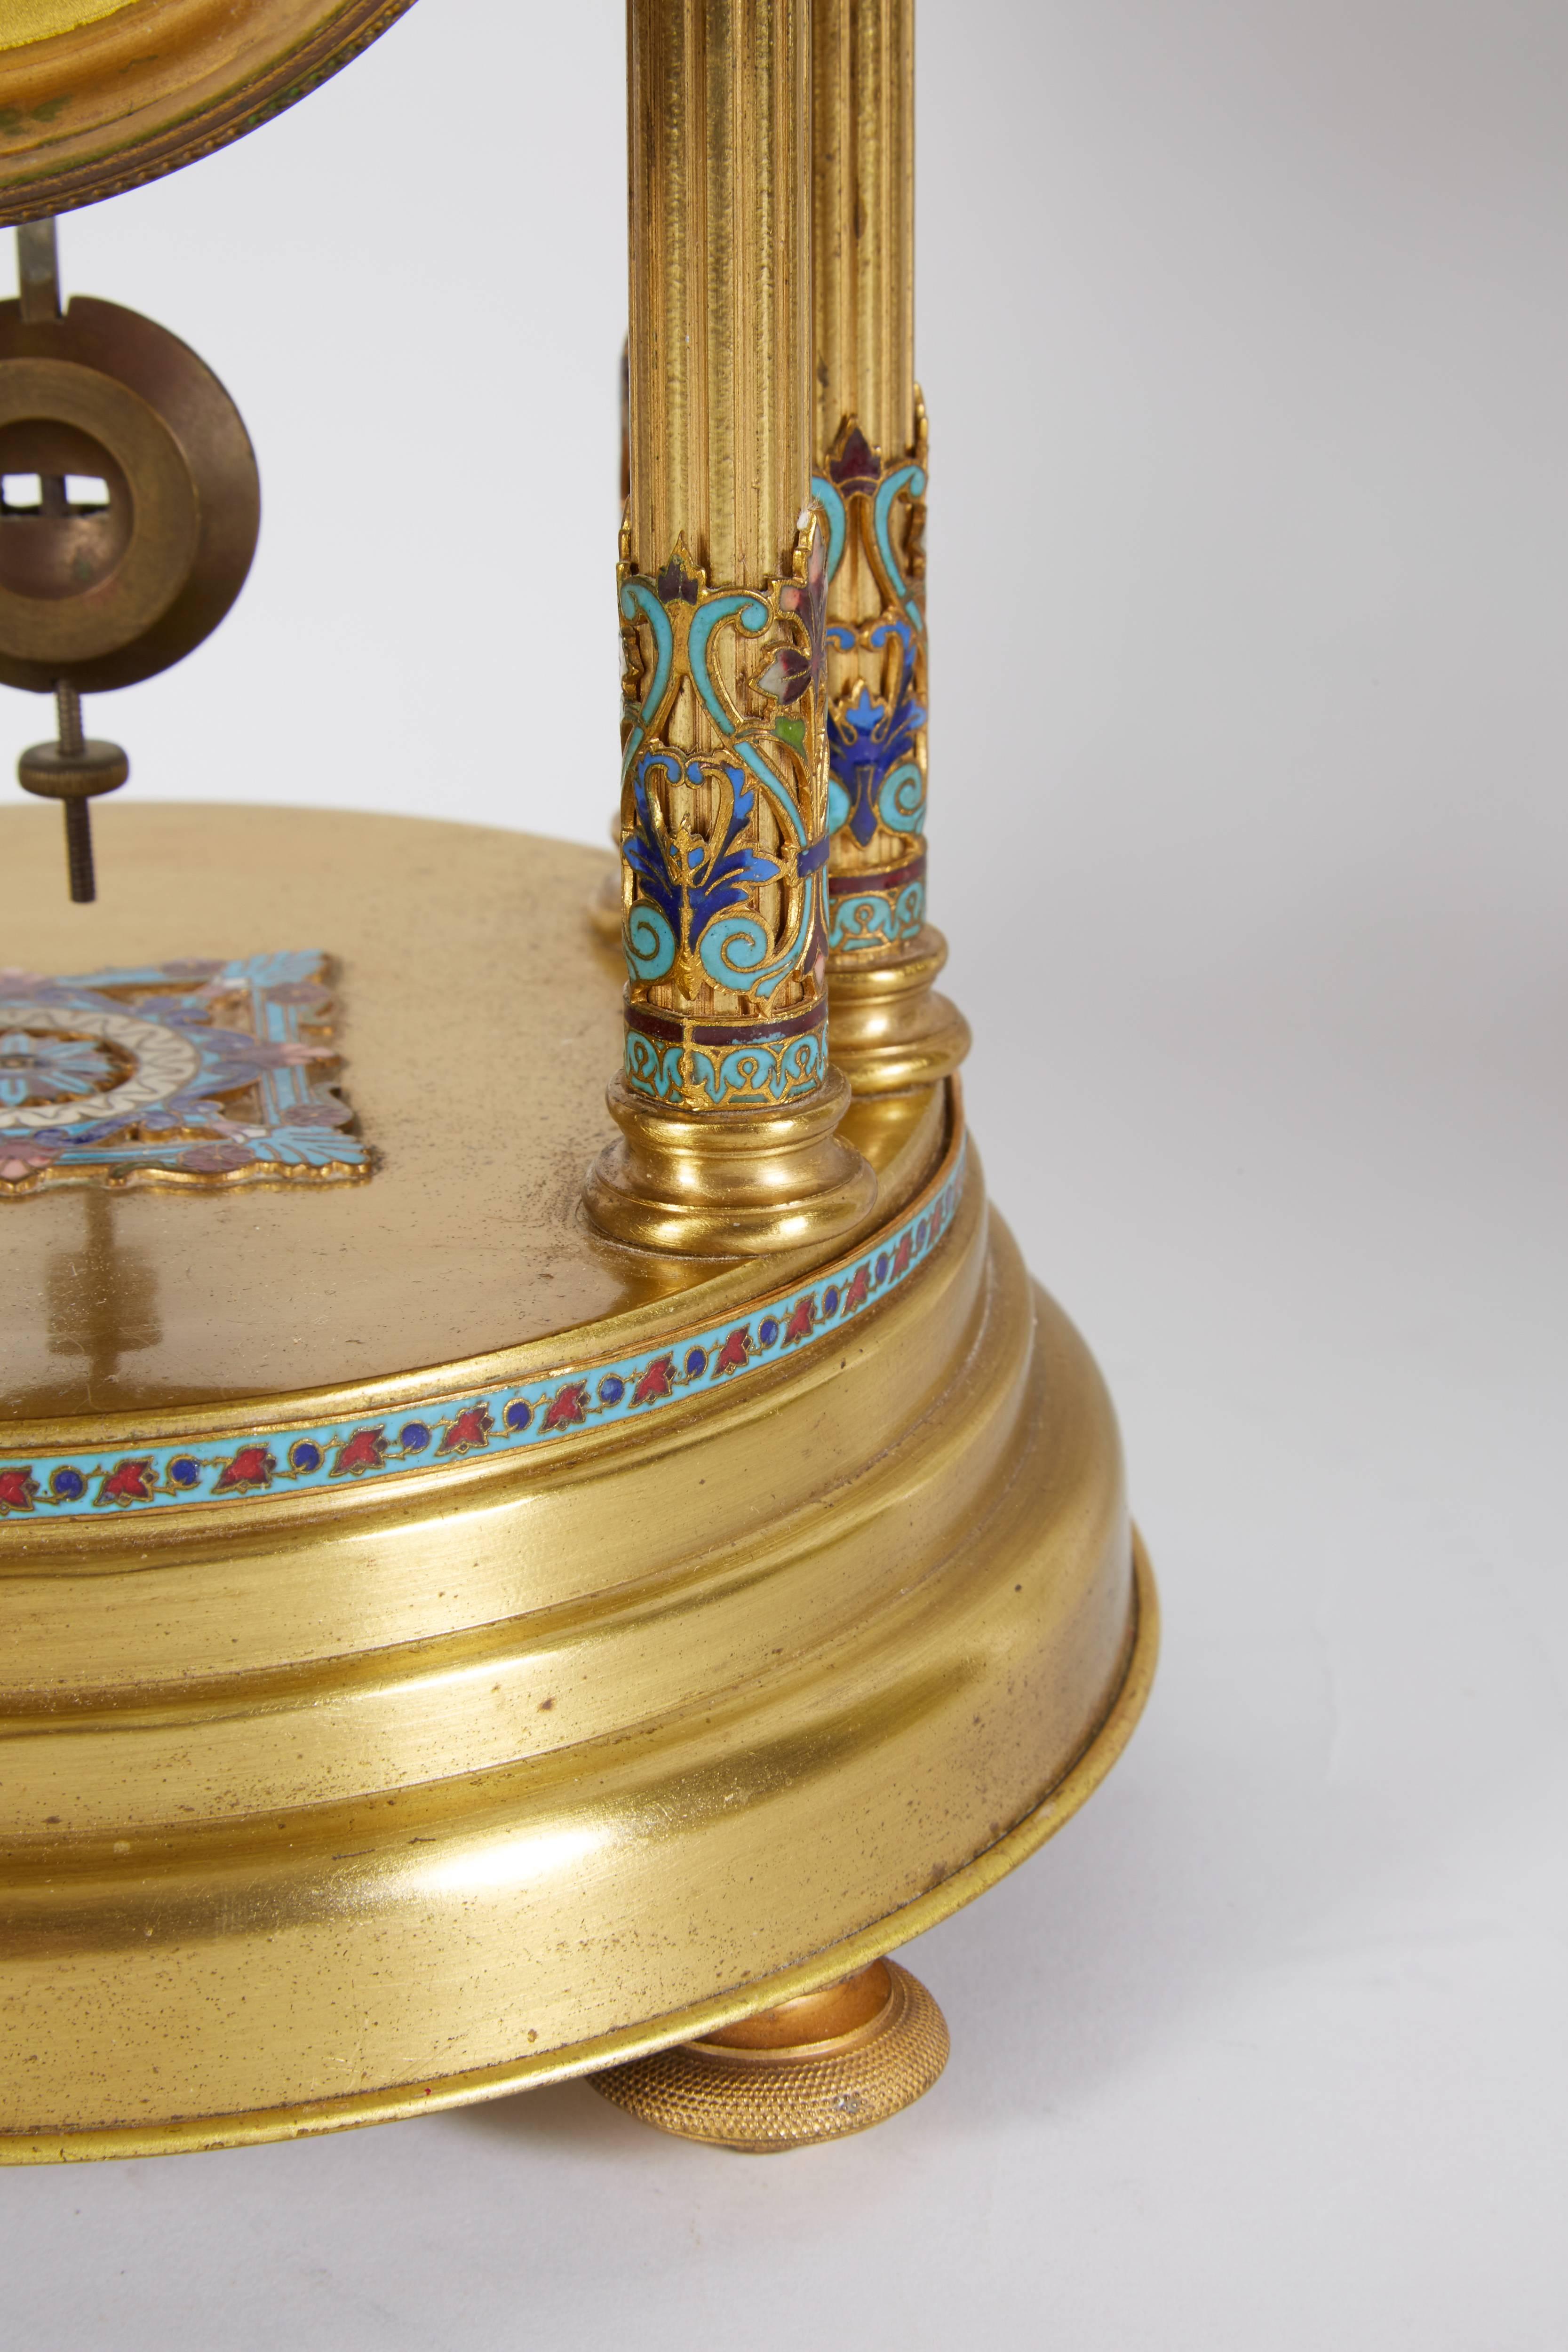 19th Century French Cloisonne Champleve Enamel Round Mantle Clock with Columns